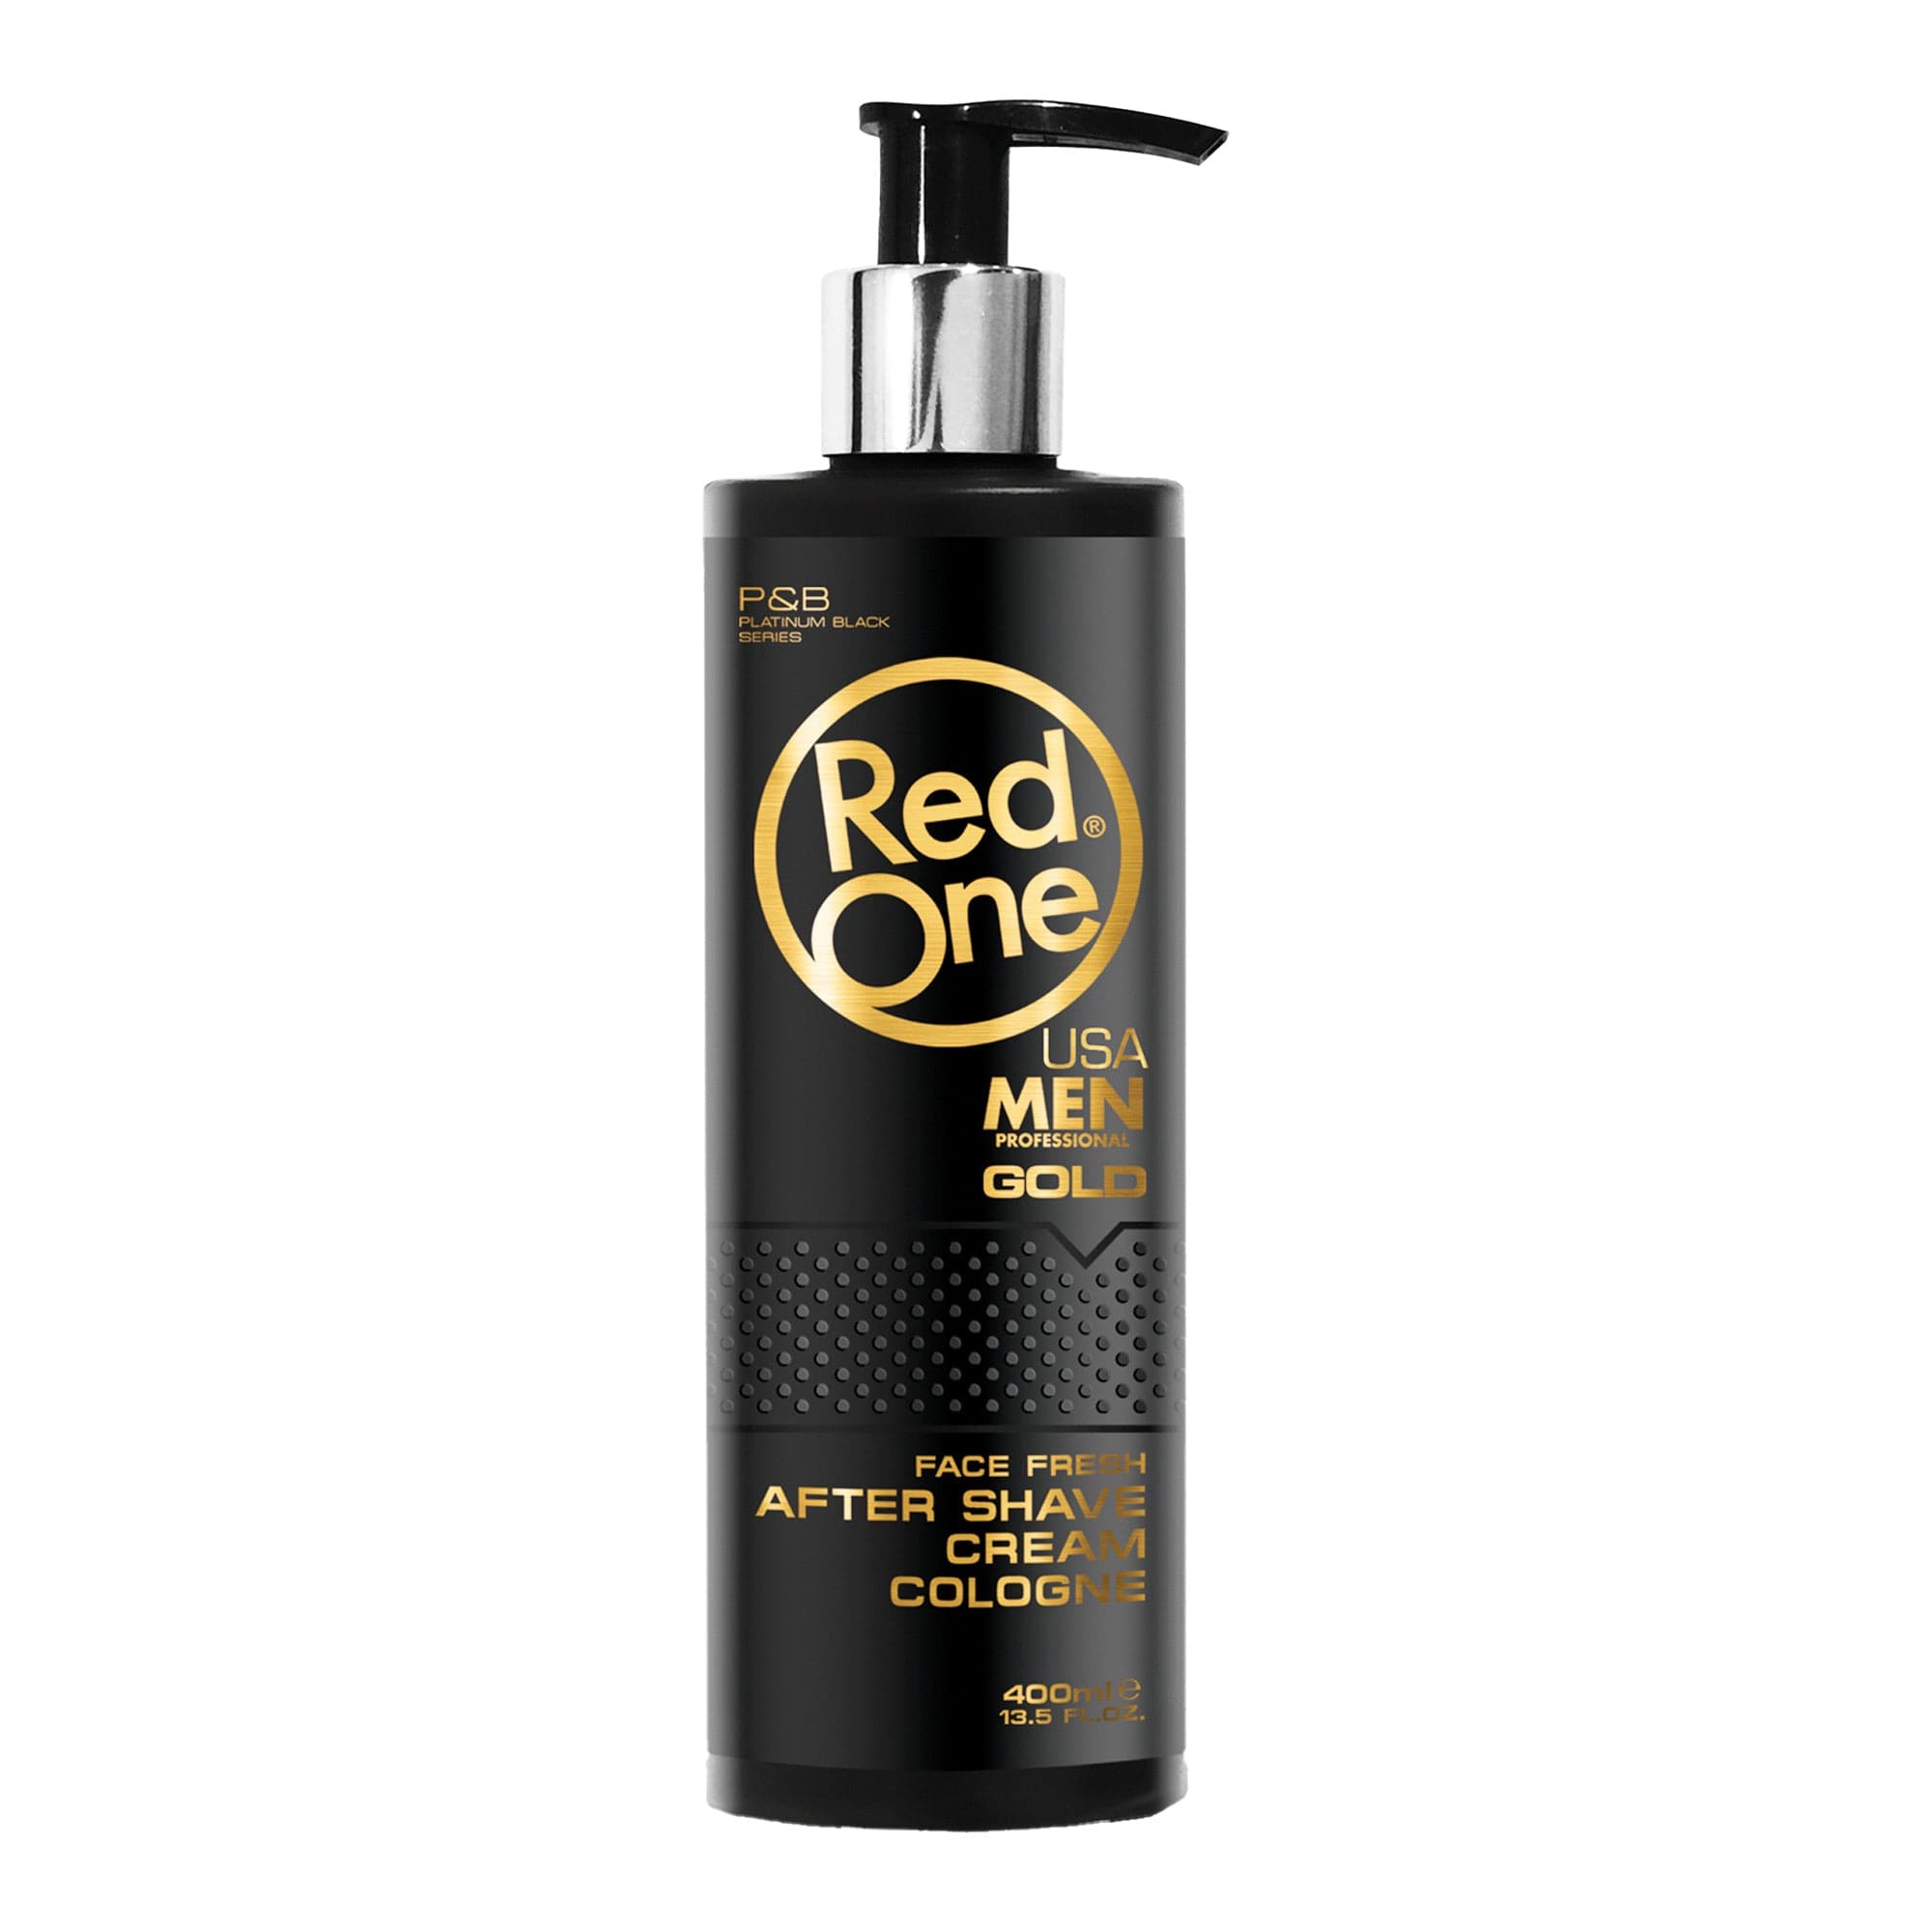 Redone - After Shave Cream Cologne Gold 400ml